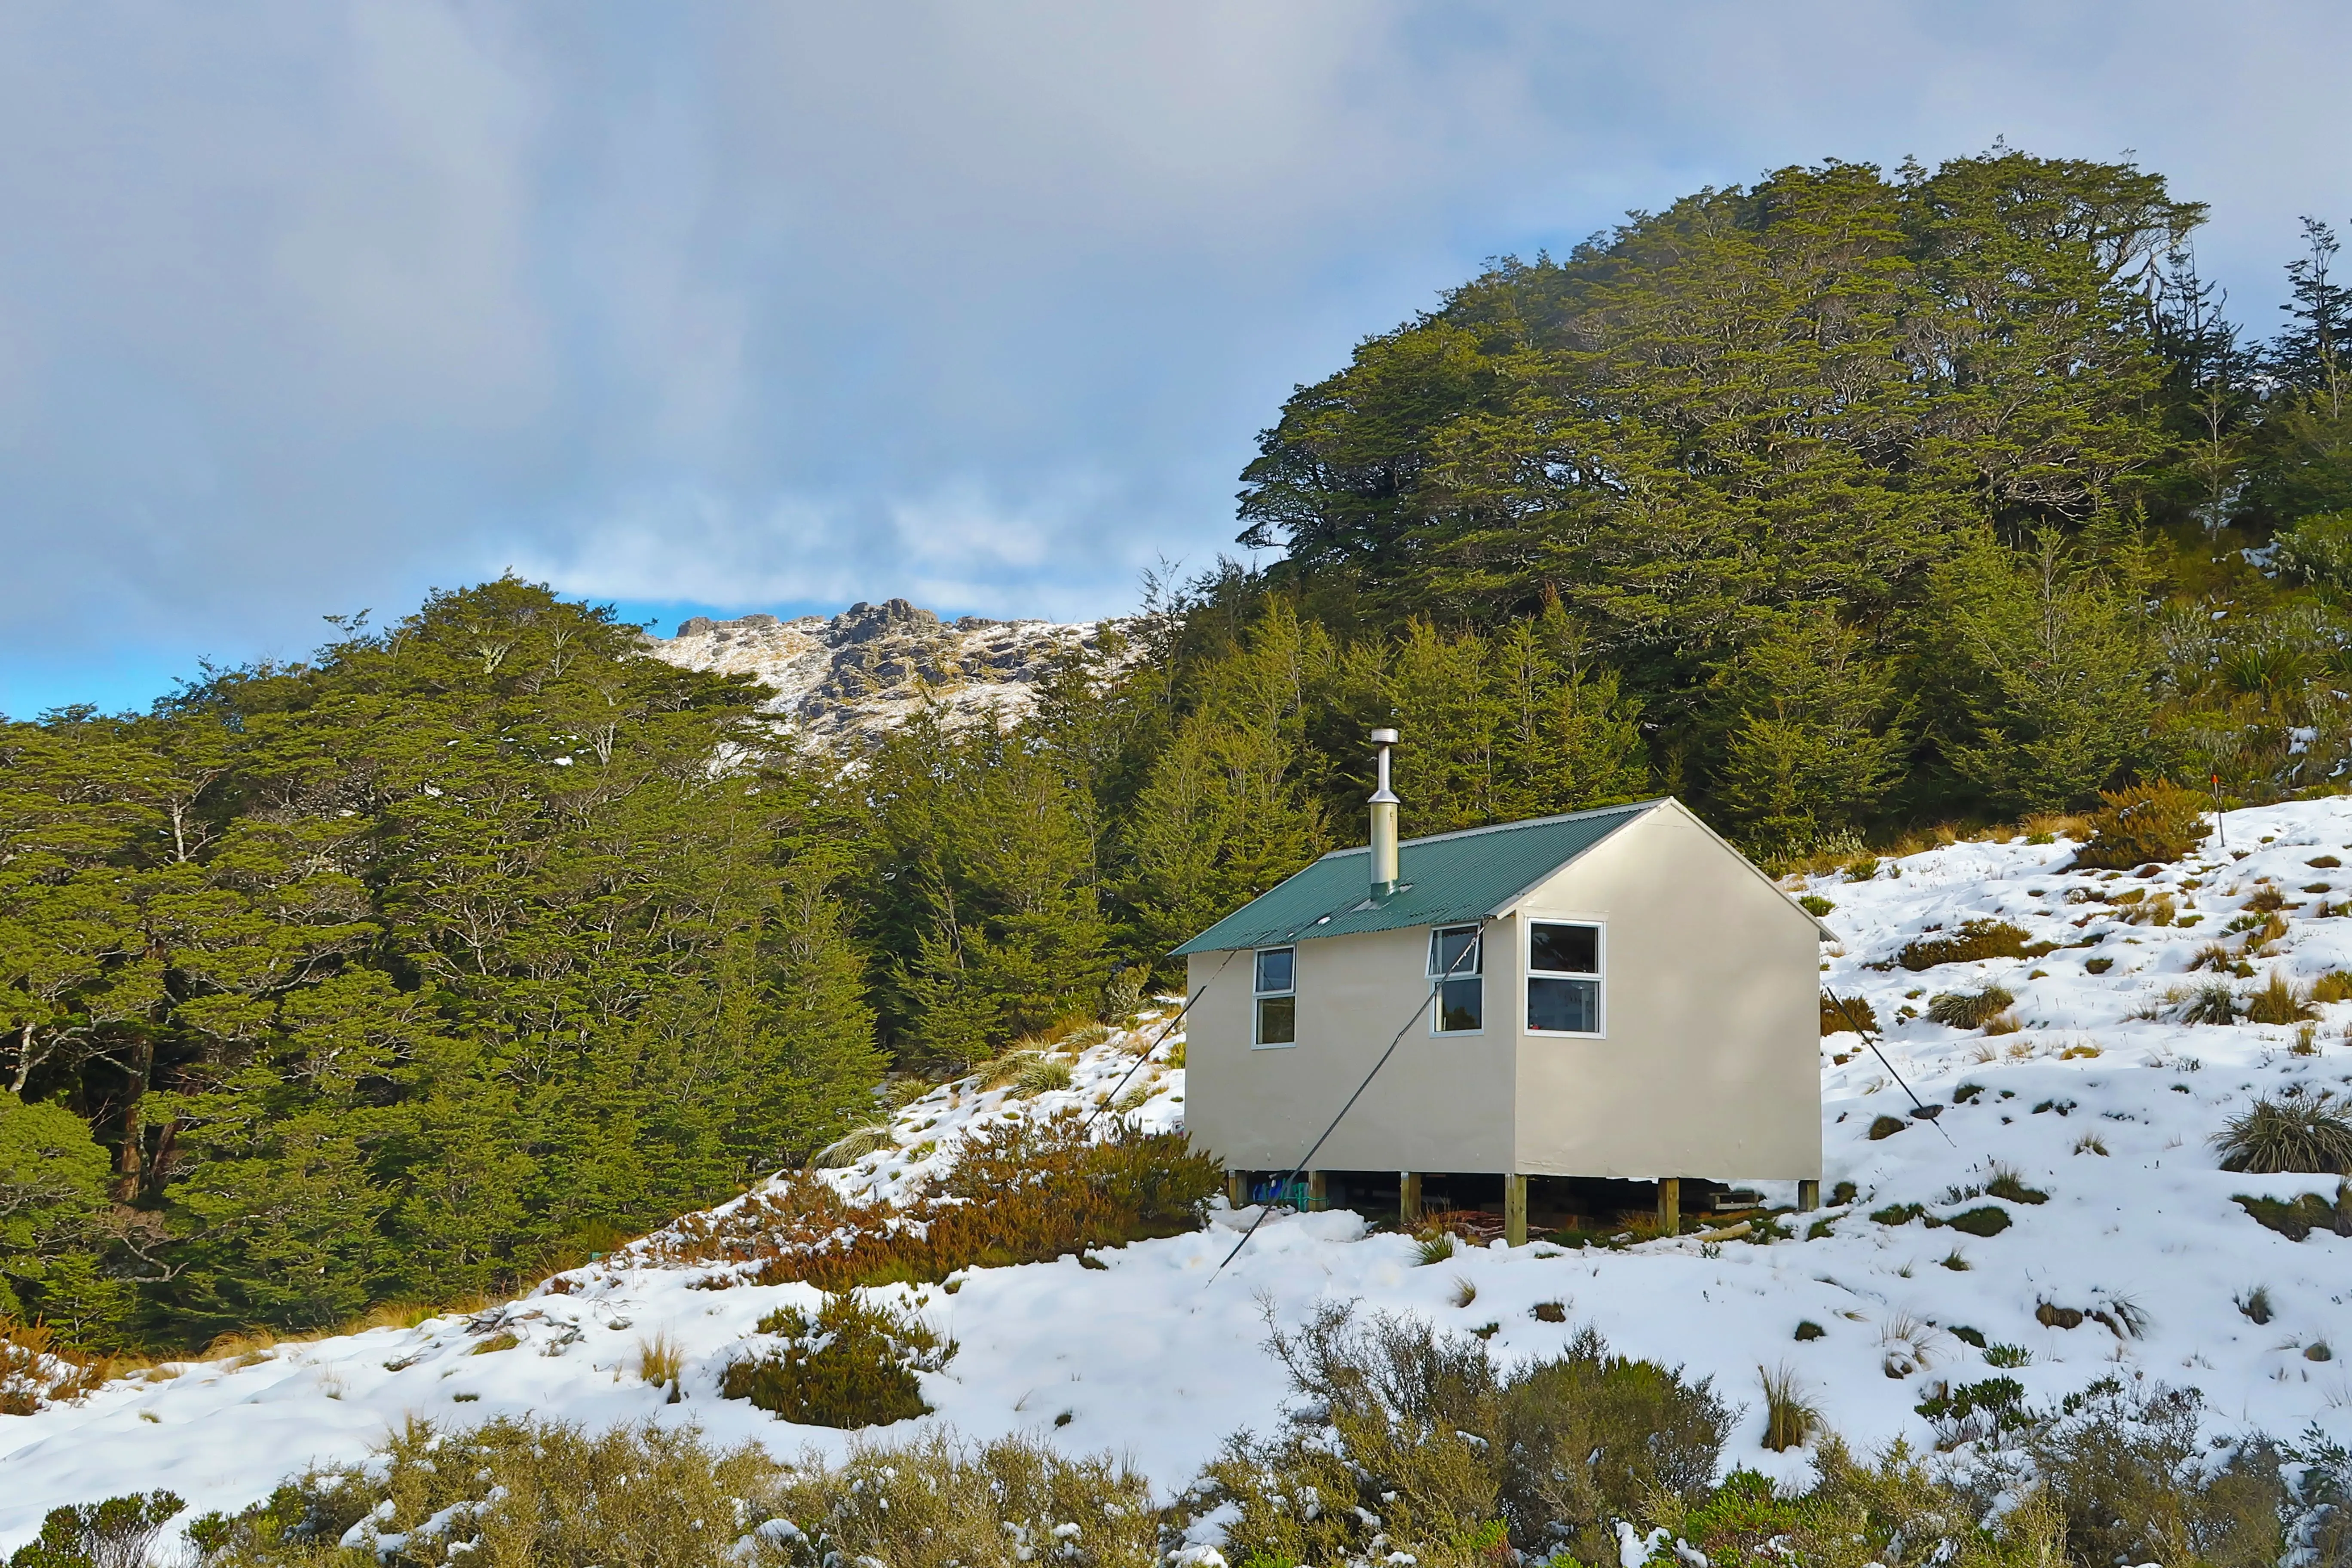 Mt Fell hut has a green roof and white exterior. It sits on a mountain covered in snow